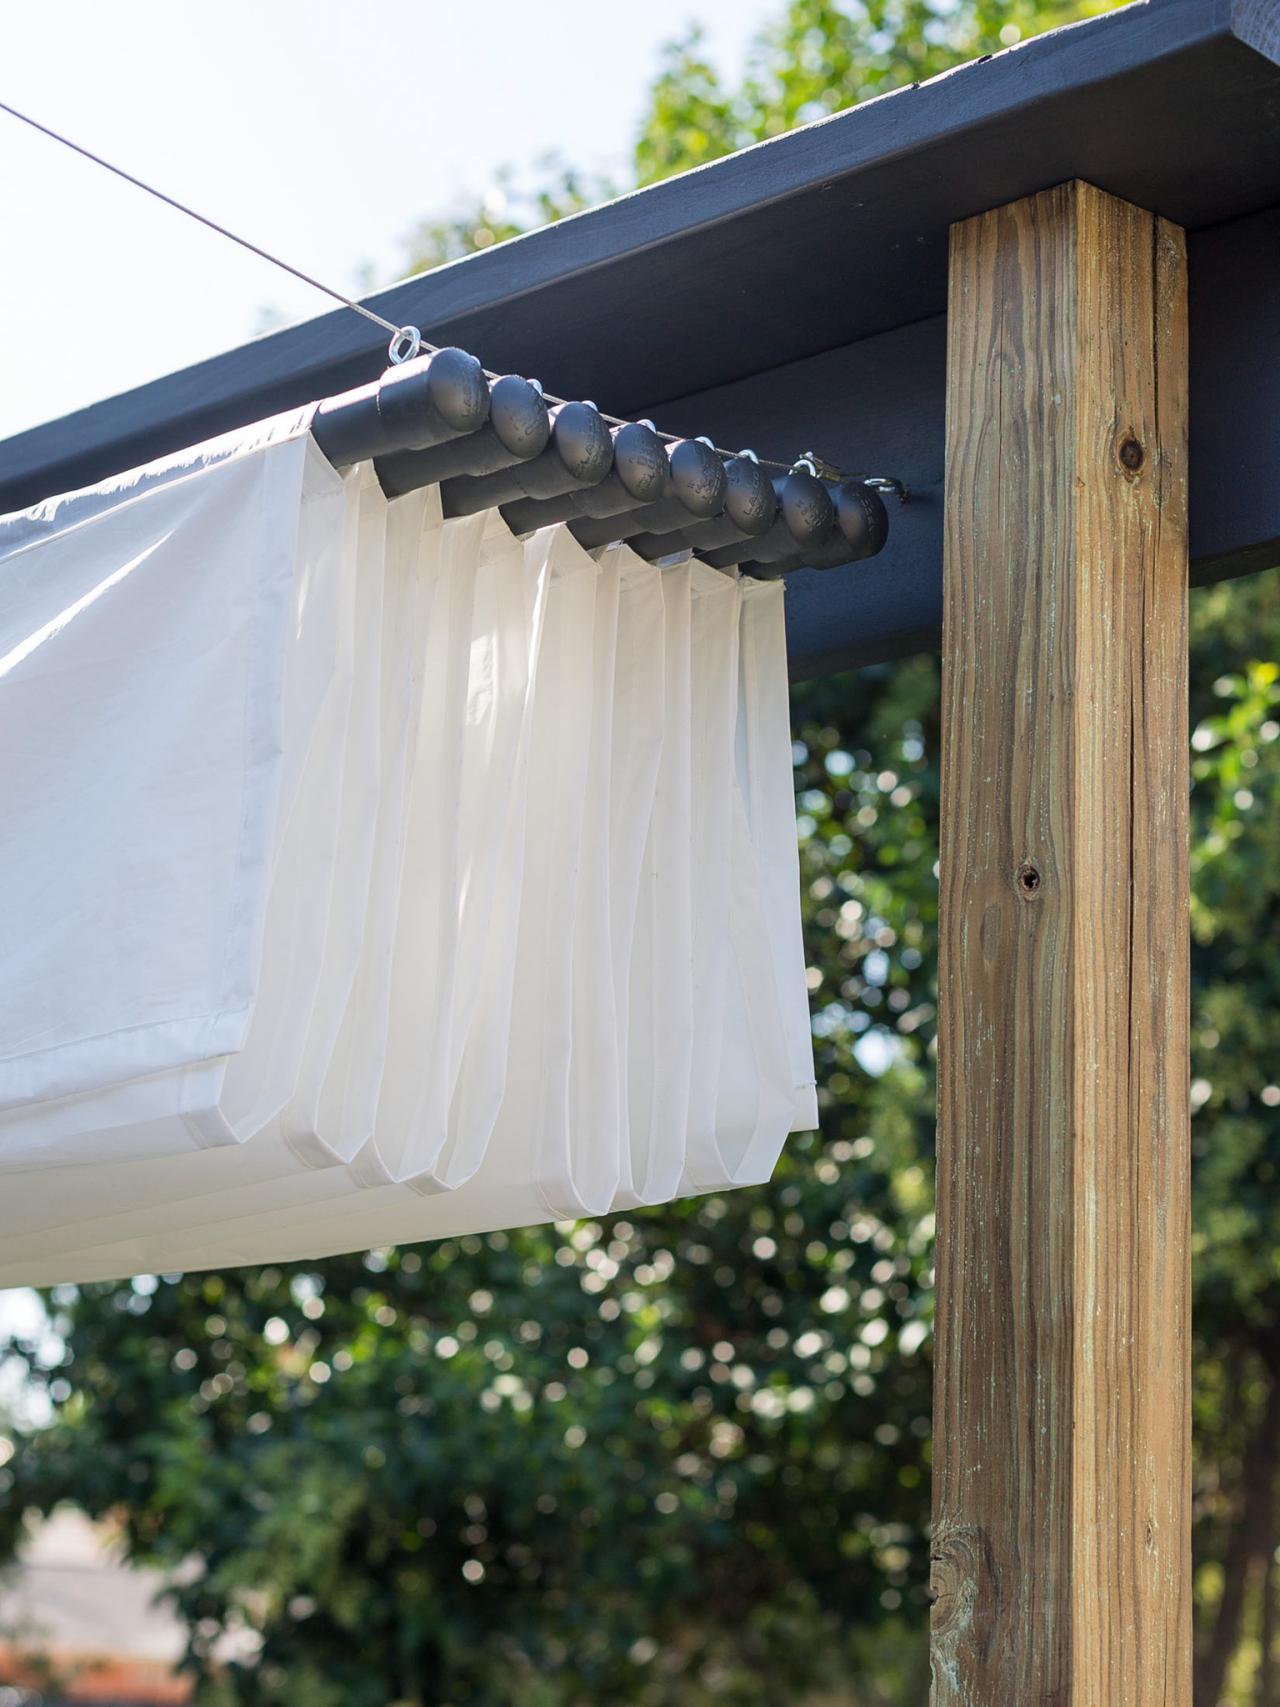 How To Build An Outdoor Canopy, How To Make A Temporary Outdoor Canopy